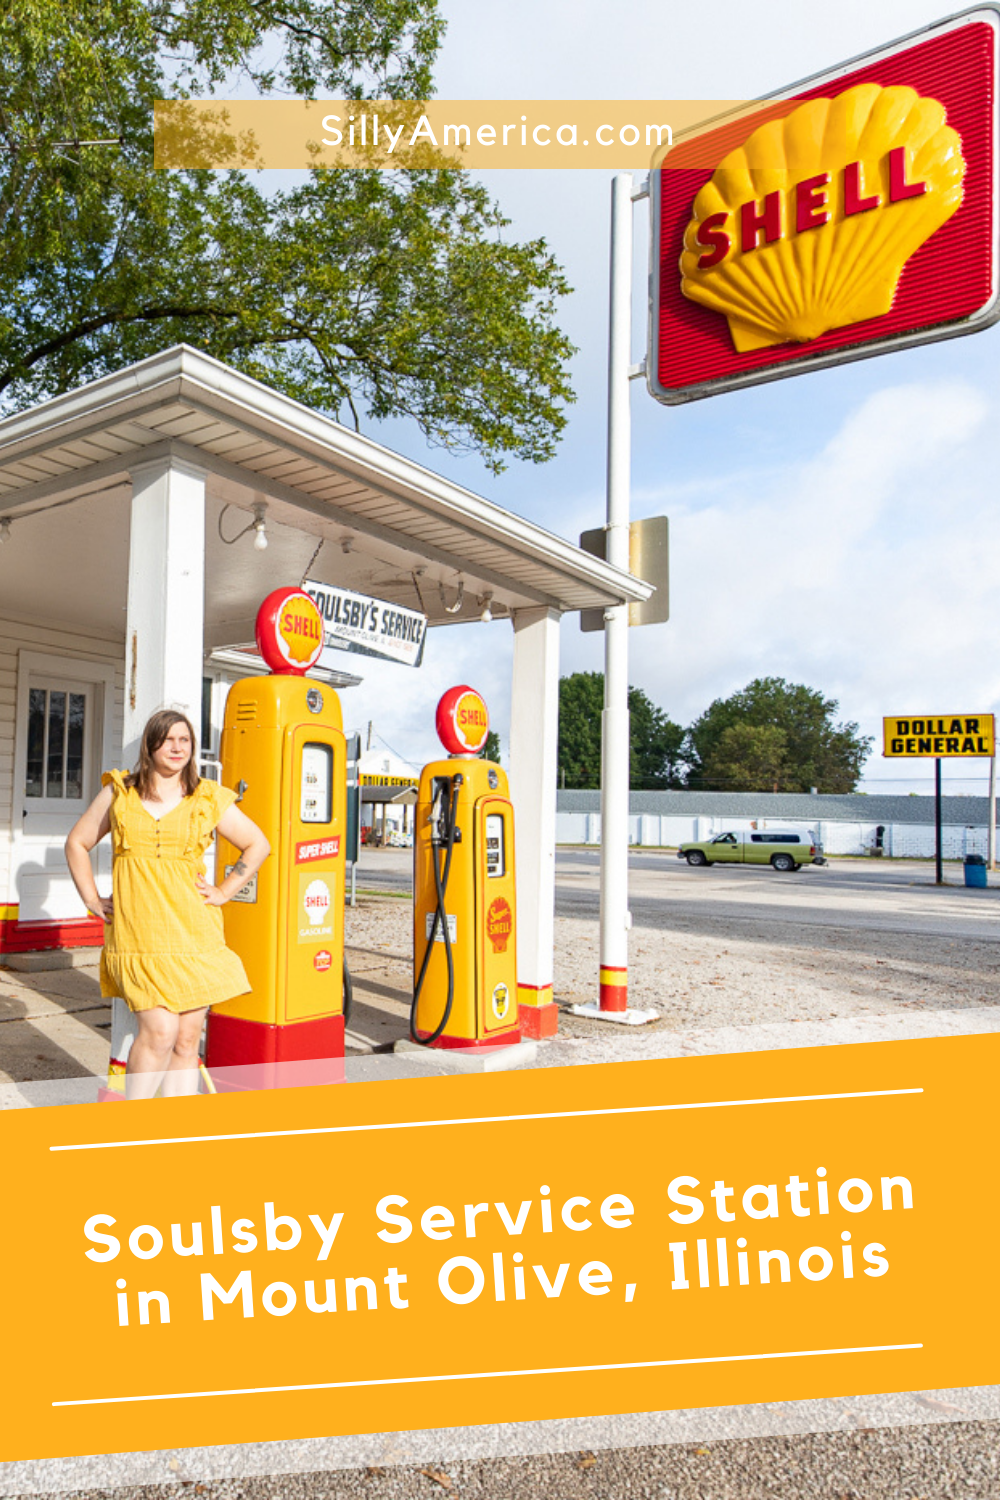 Soulsby Service Station in Mount Olive, Illinois is a historic gas station that served Route 66 travelers for decades. In fact this site is one of the oldest and longest running service stations on all of Route 66 and the oldest usable service station on the highway in Illinois.  #RoadTrips #RoadTripStop #Route66 #Route66RoadTrip #IllinoisRoute66 #Illinois #IllinoisRoadTrip #IllinoisRoadsideAttractions #RoadsideAttractions #RoadsideAttraction #RoadsideAmerica #RoadTrip